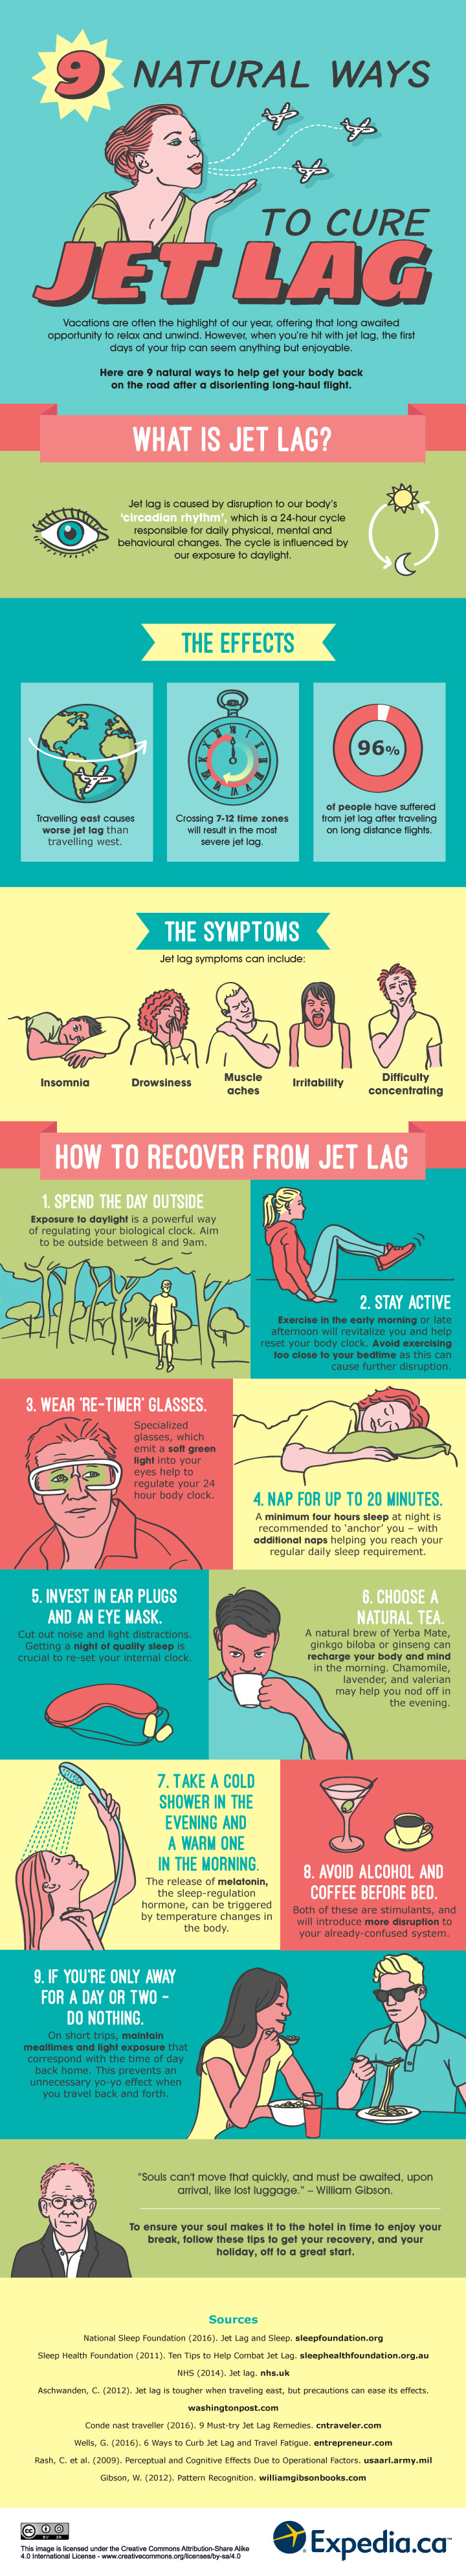 9-natural-ways-to-cure-jet-lag.jpg